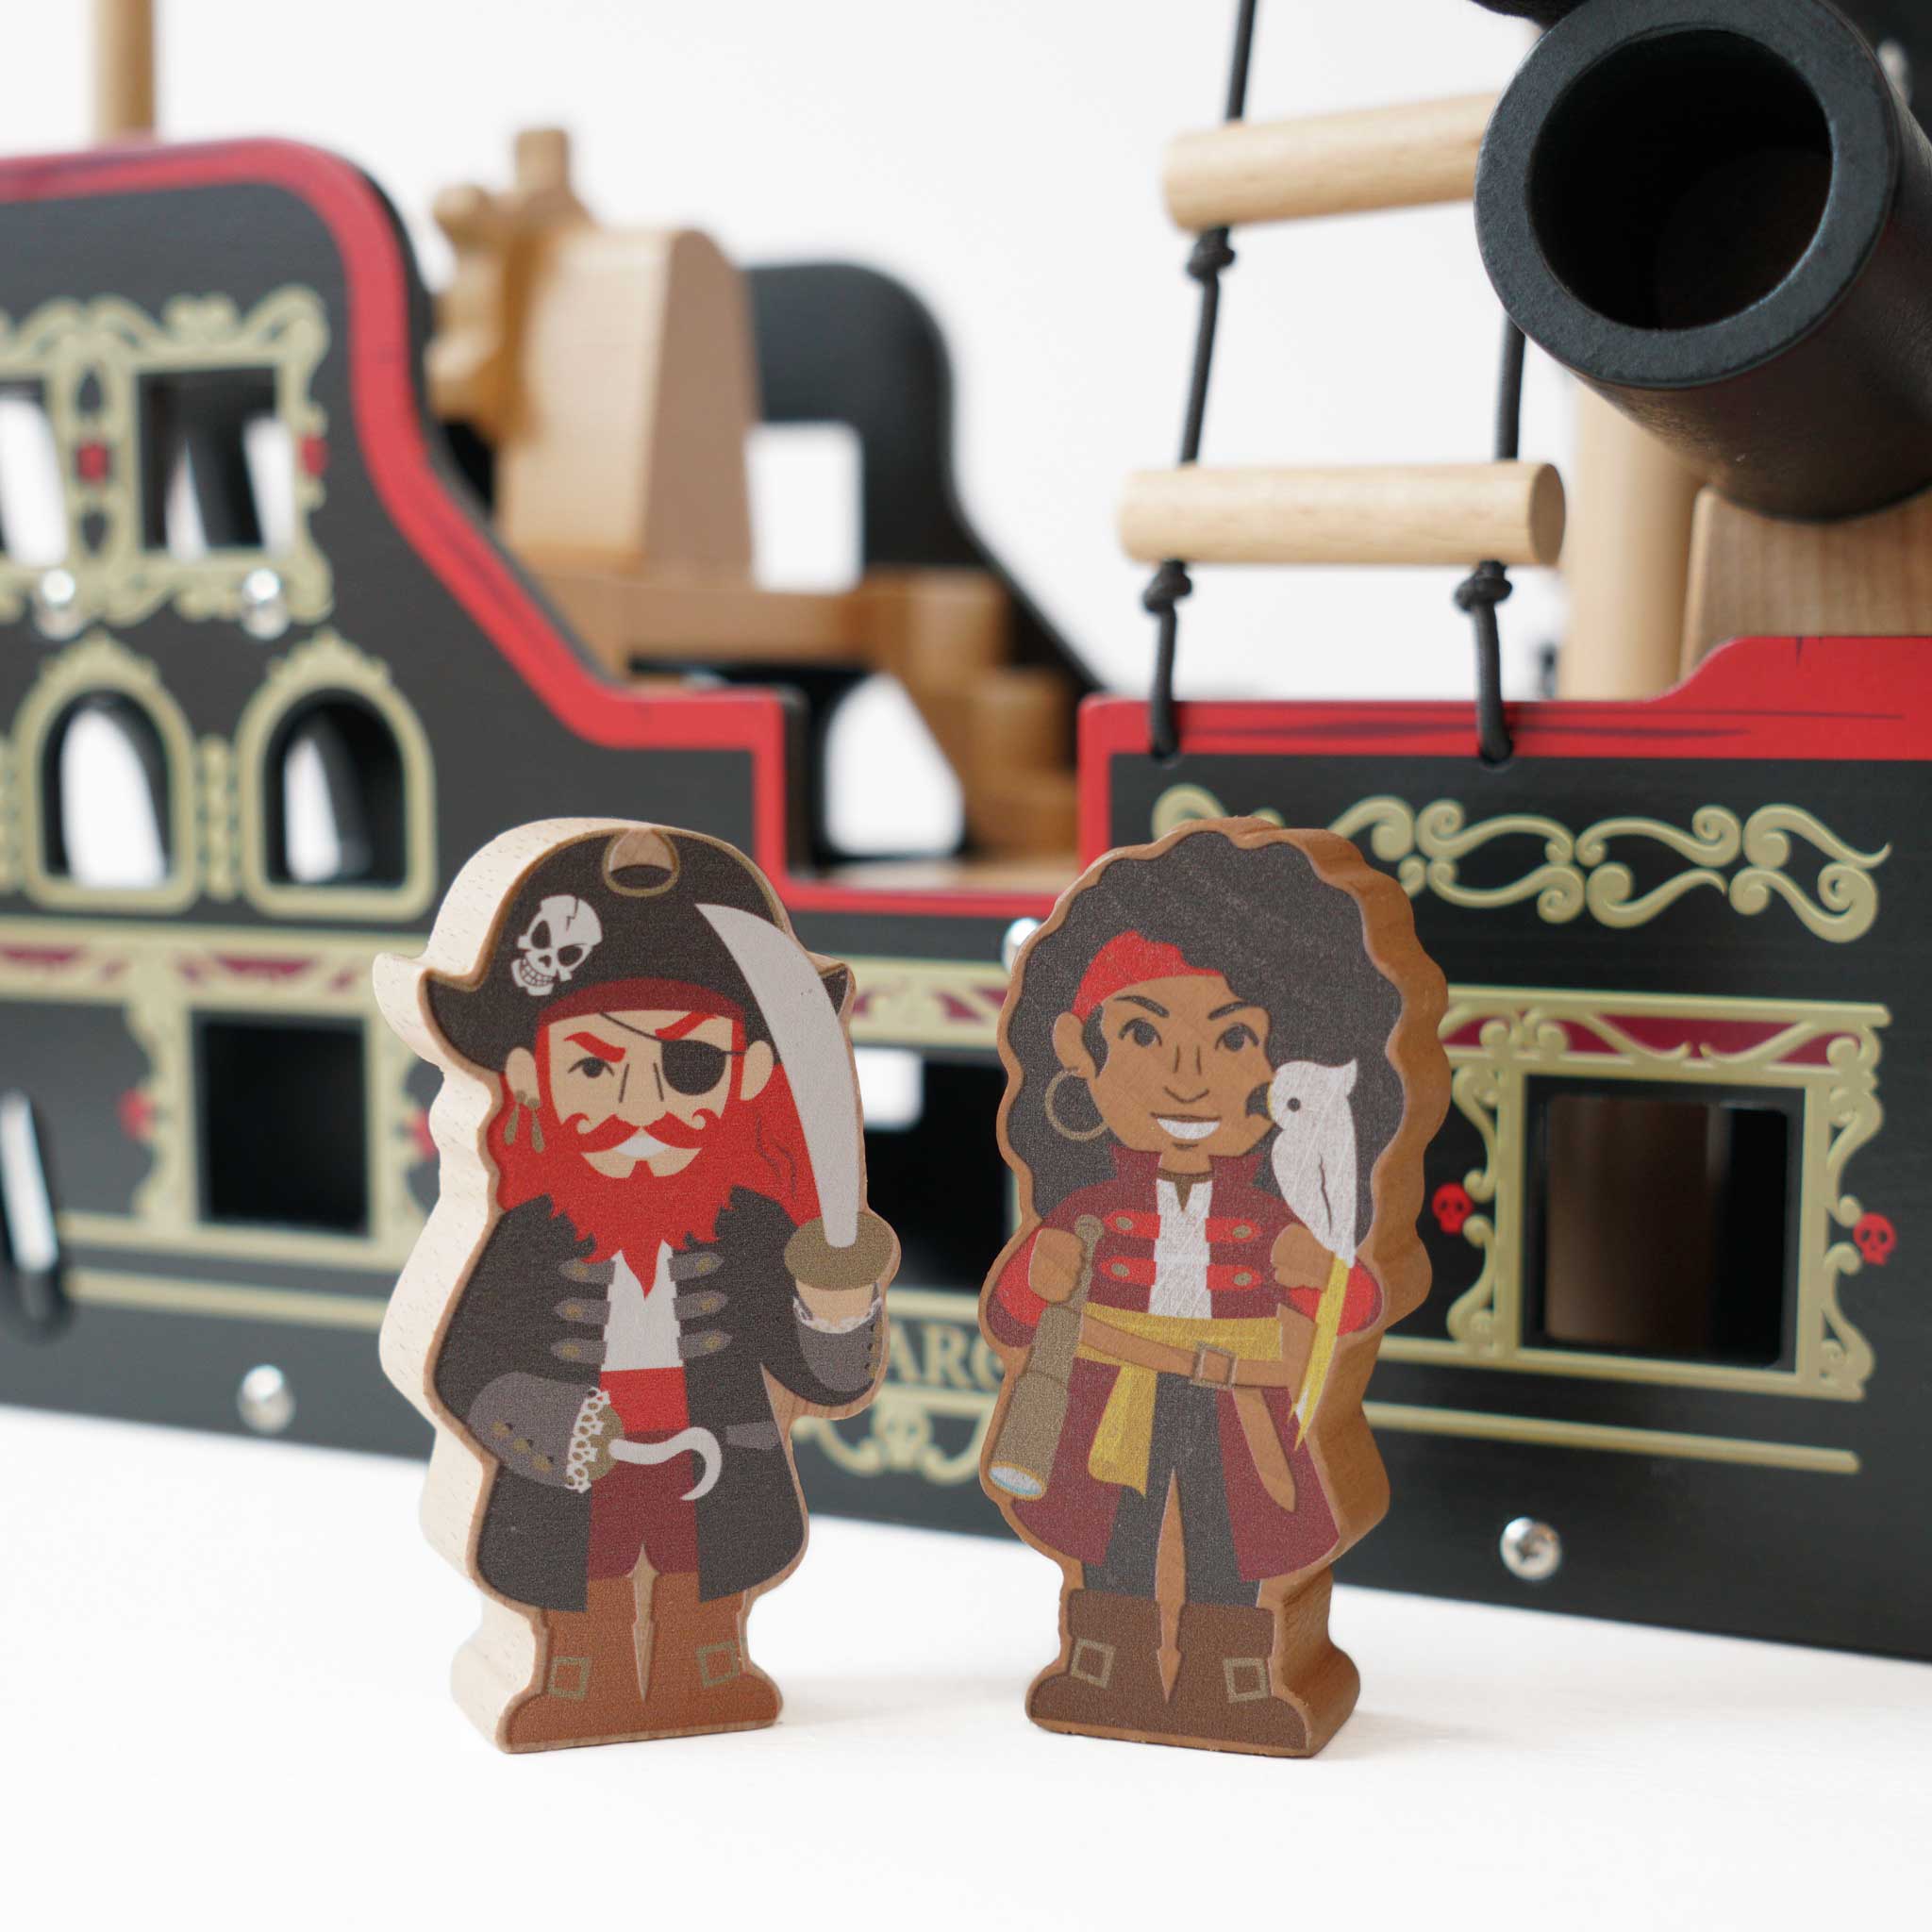 TV246-barbarossa-pirate-ship-characters-figures-infront-of-boat